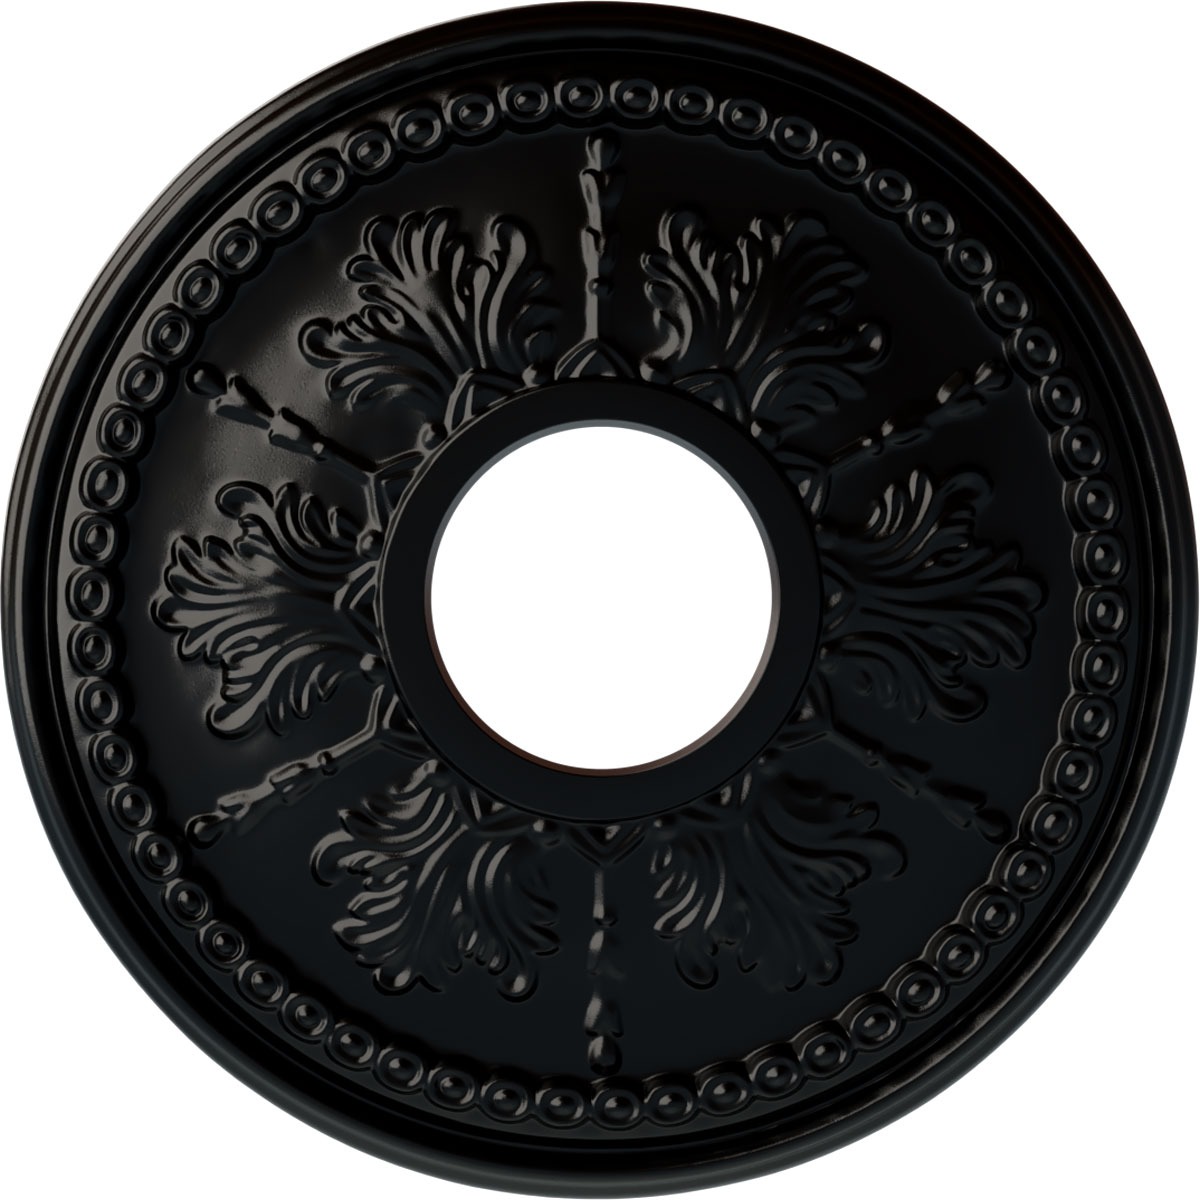 Ekena Millwork 13 7/8"OD x 3 3/4"ID x 1 1/4"P Tirana Ceiling Medallion (Fits Canopies up to 4 3/4"), Hand-Painted Jet Black - image 1 of 4